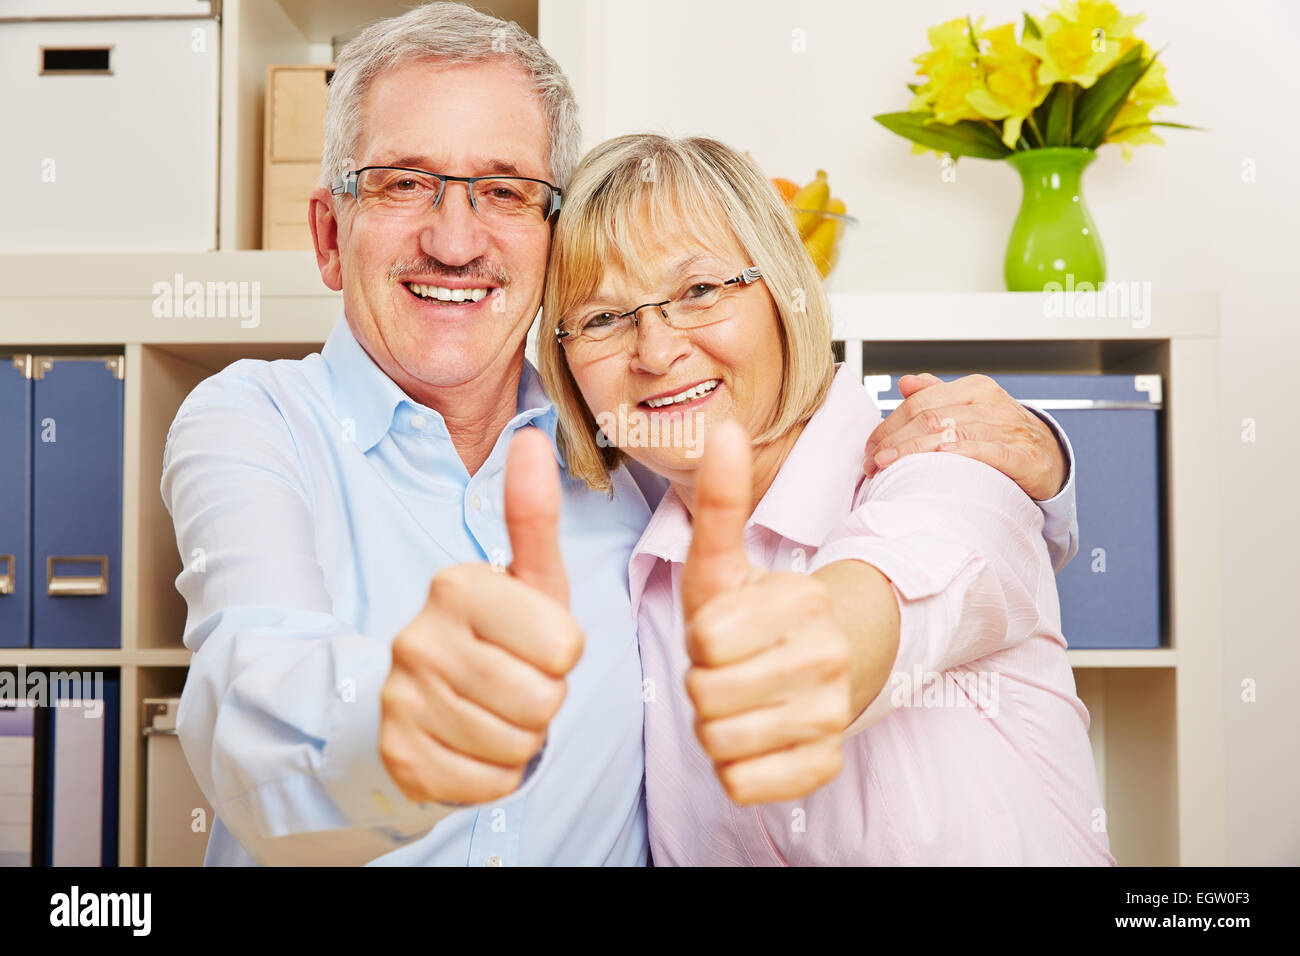 Happy couple of senior citizens holding thumbs up together Stock Photo